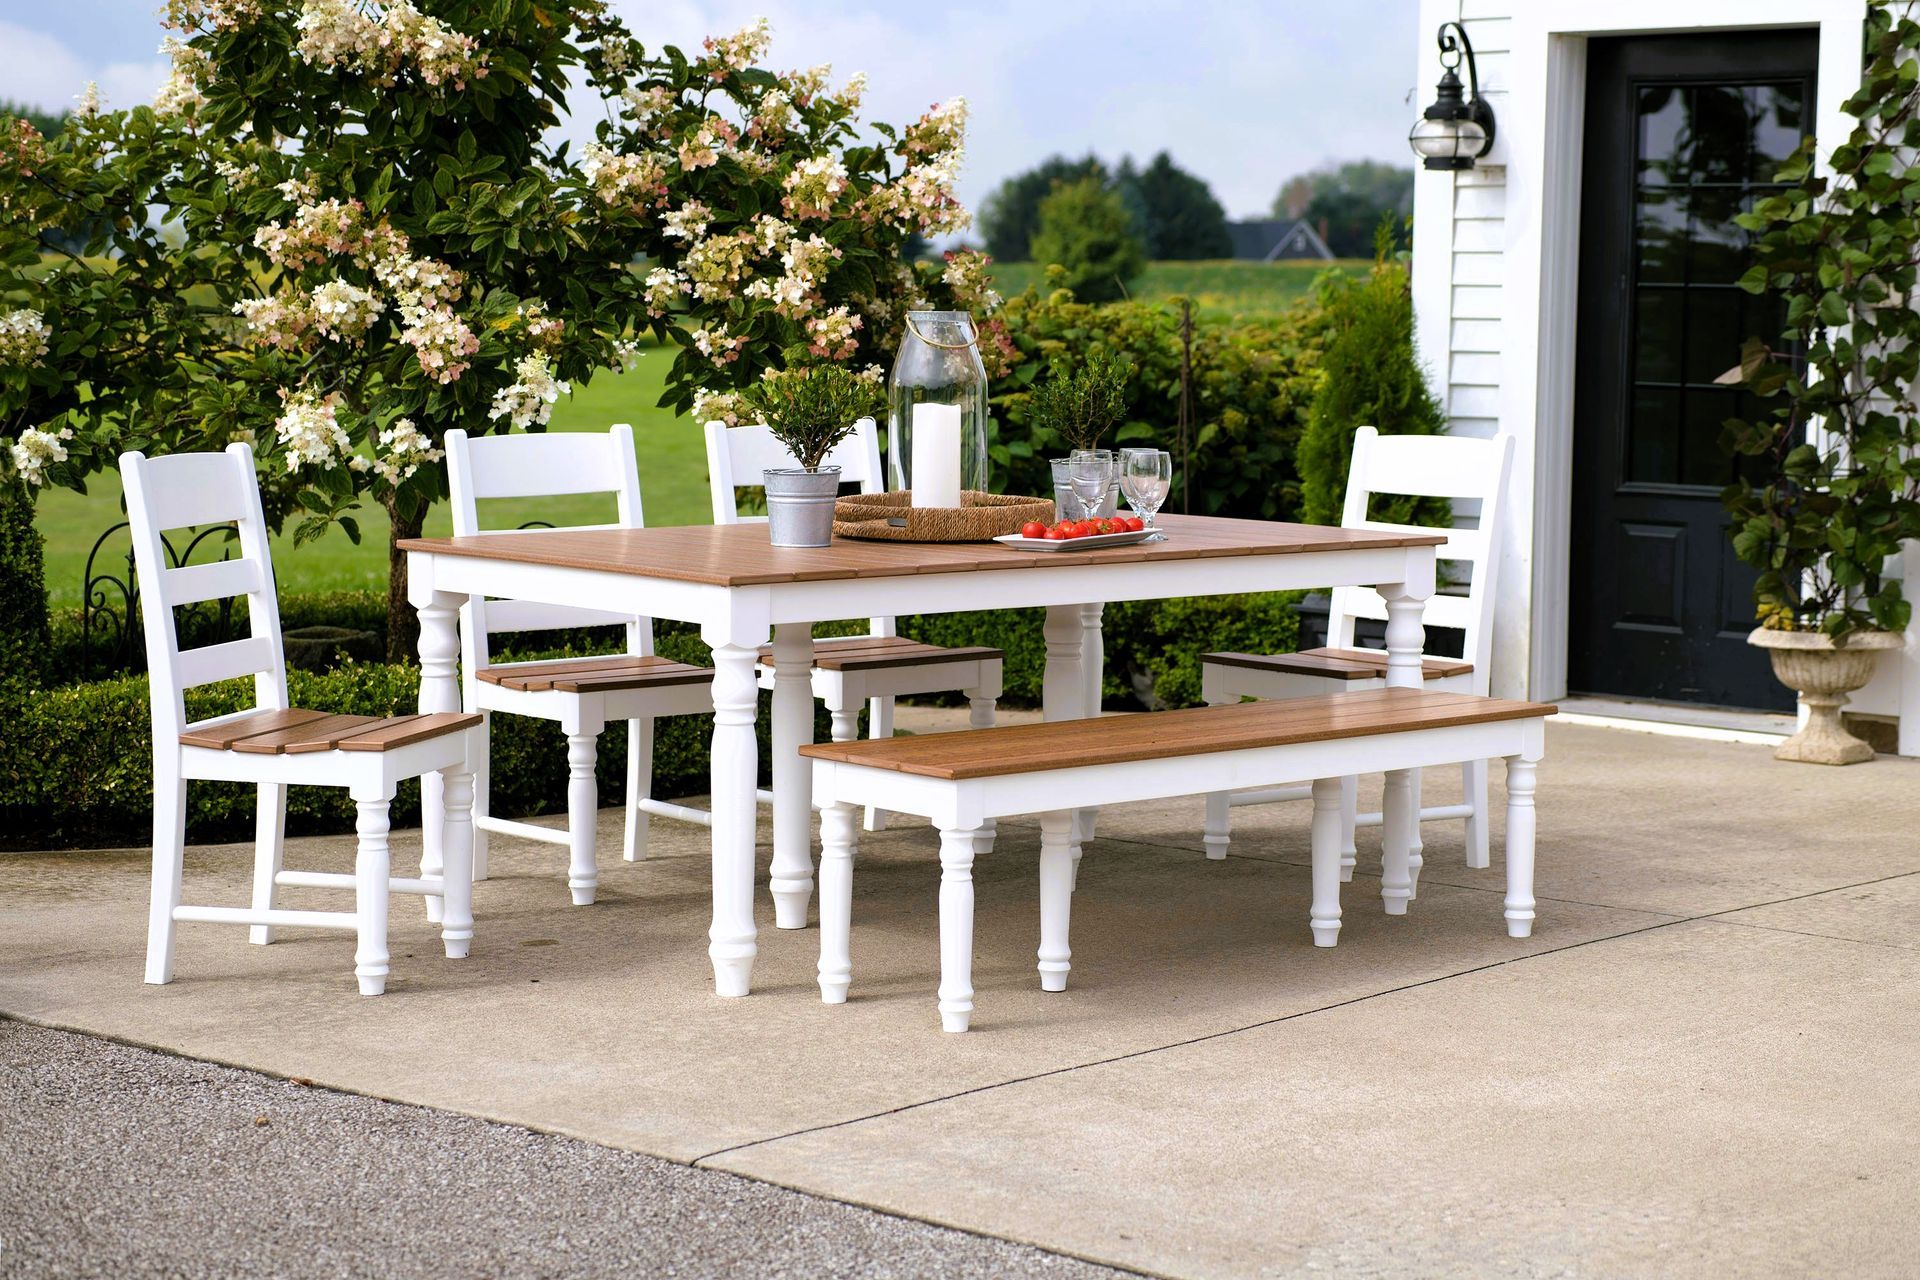 Concrete patio dining area with a white and wooden table set, flowers, and a refreshment tray.